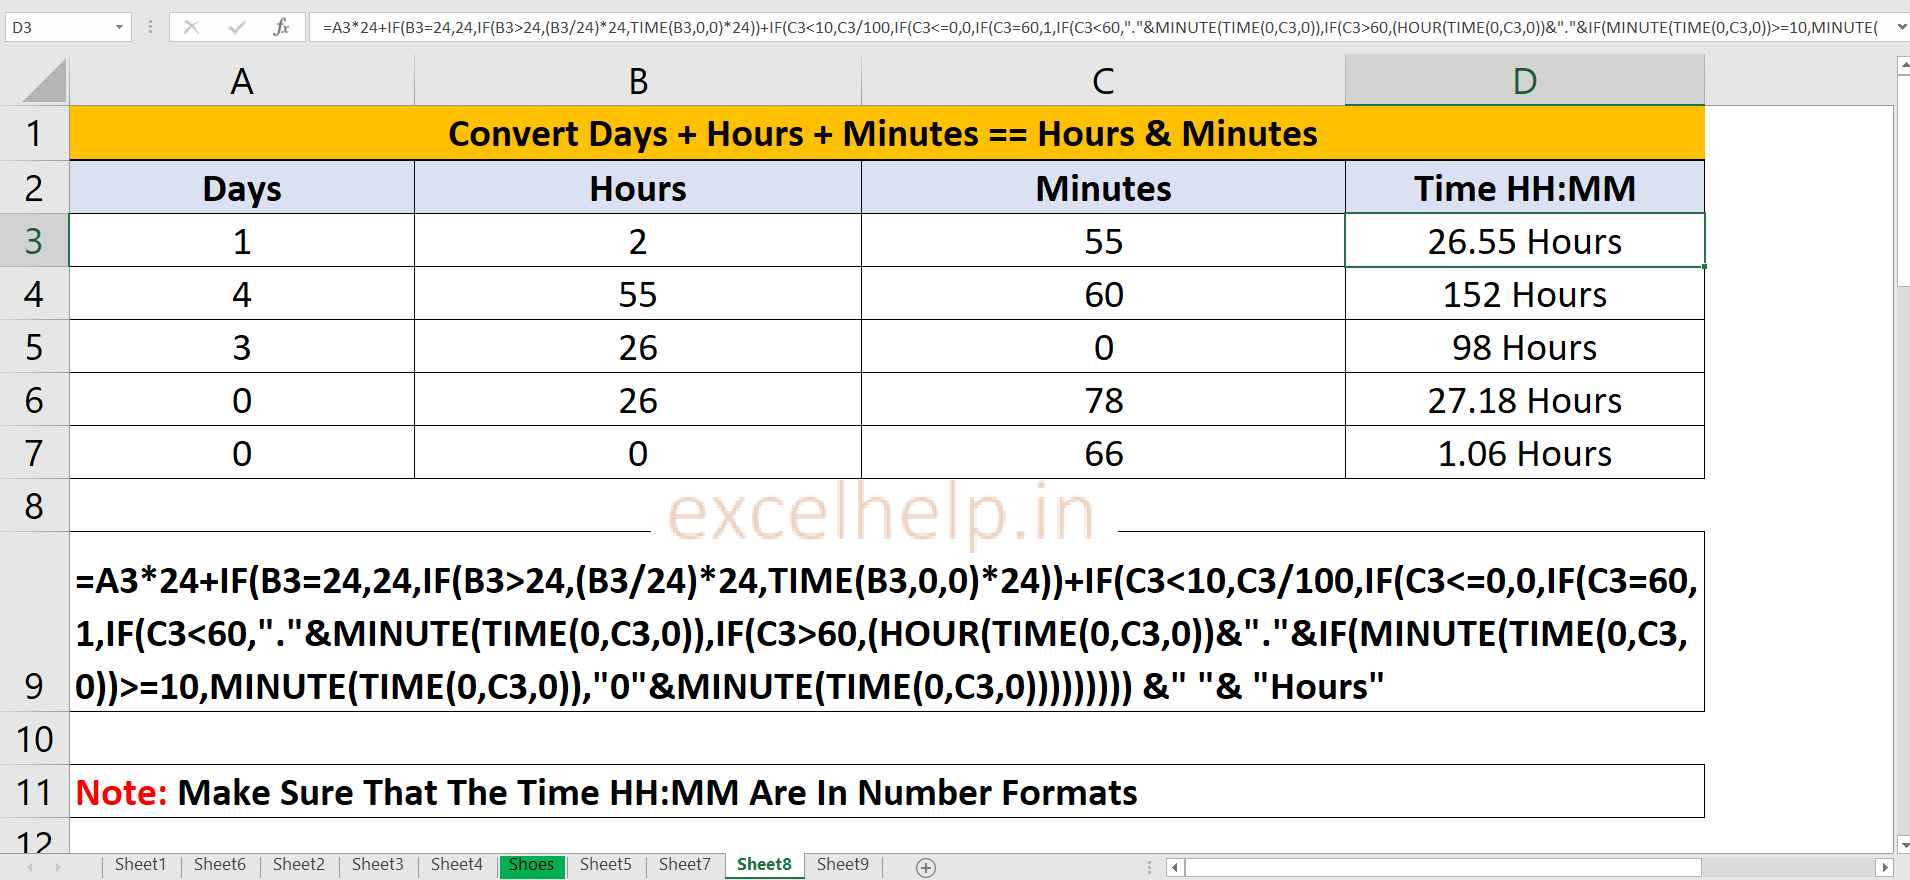 openoffice calculate hour minutes